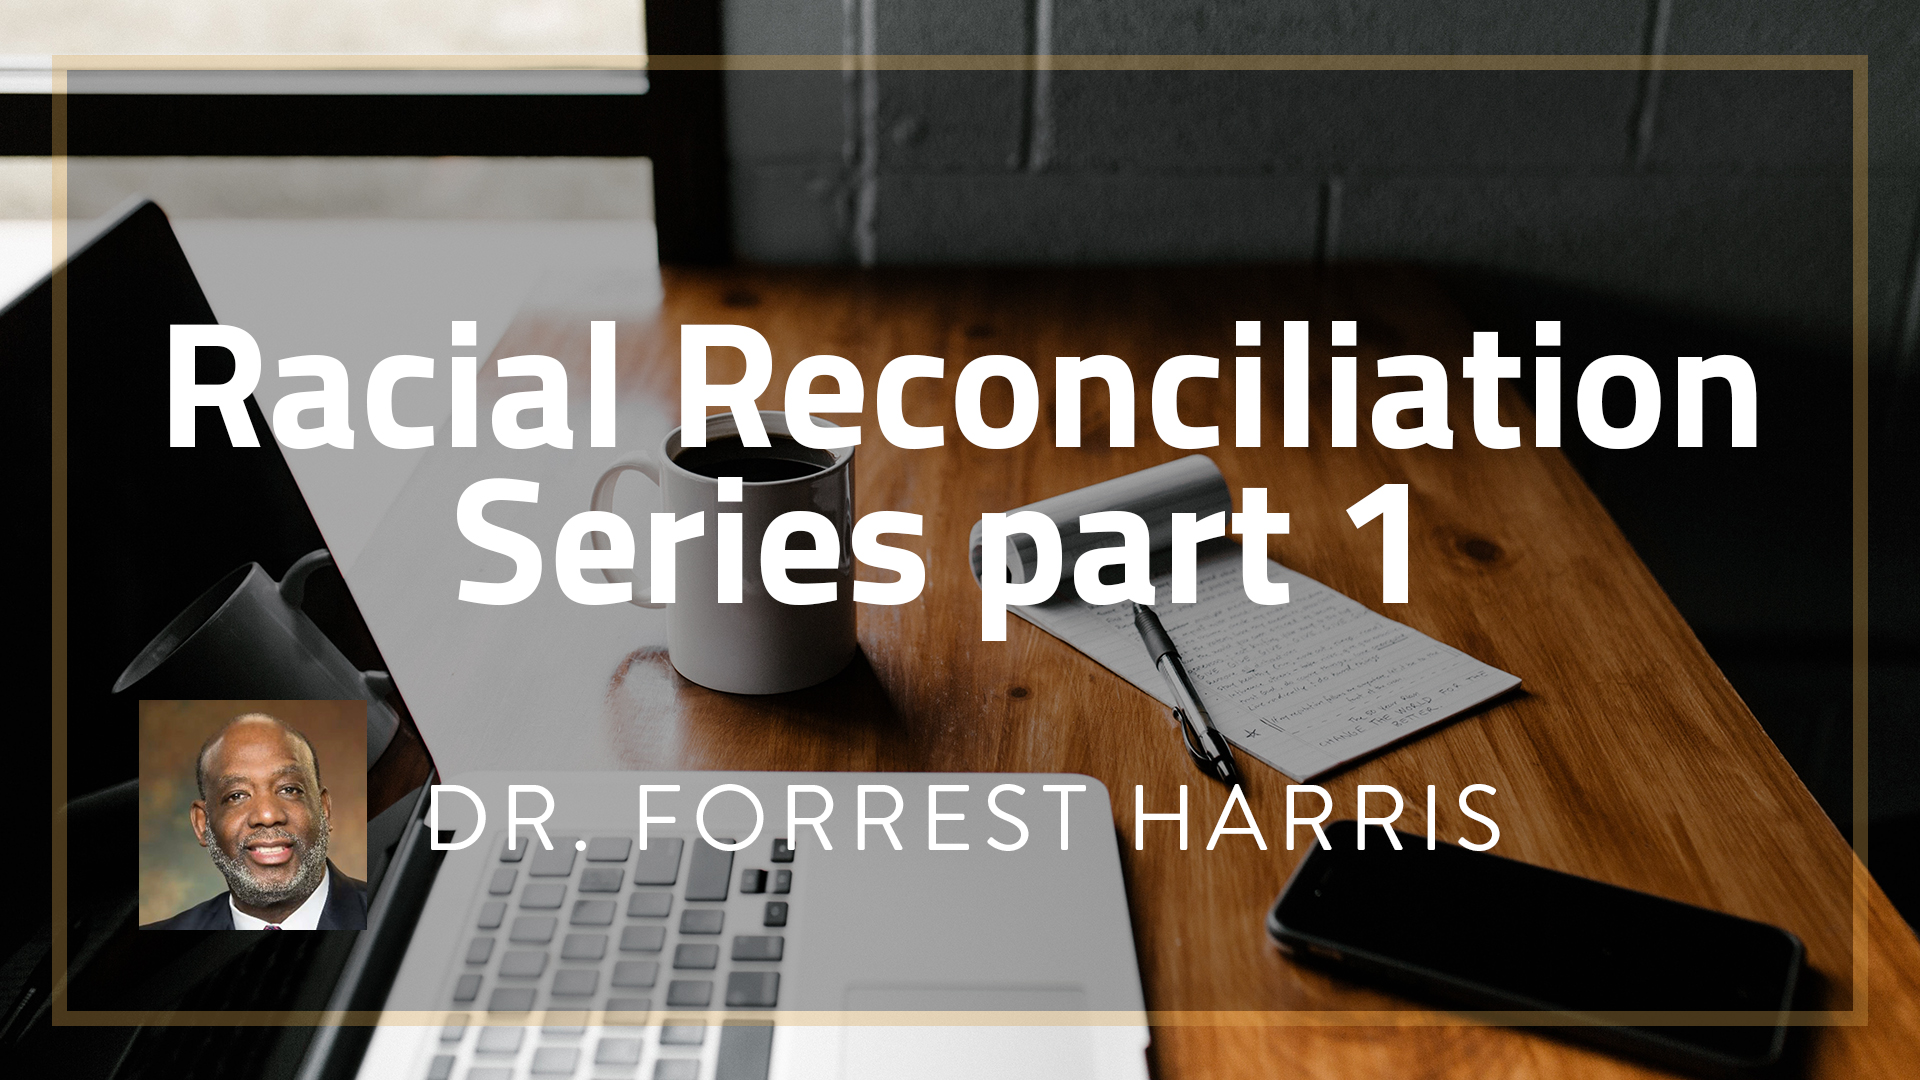 Sept. 9 - Racial Reconciliation Series with Dr. Forrest Harris